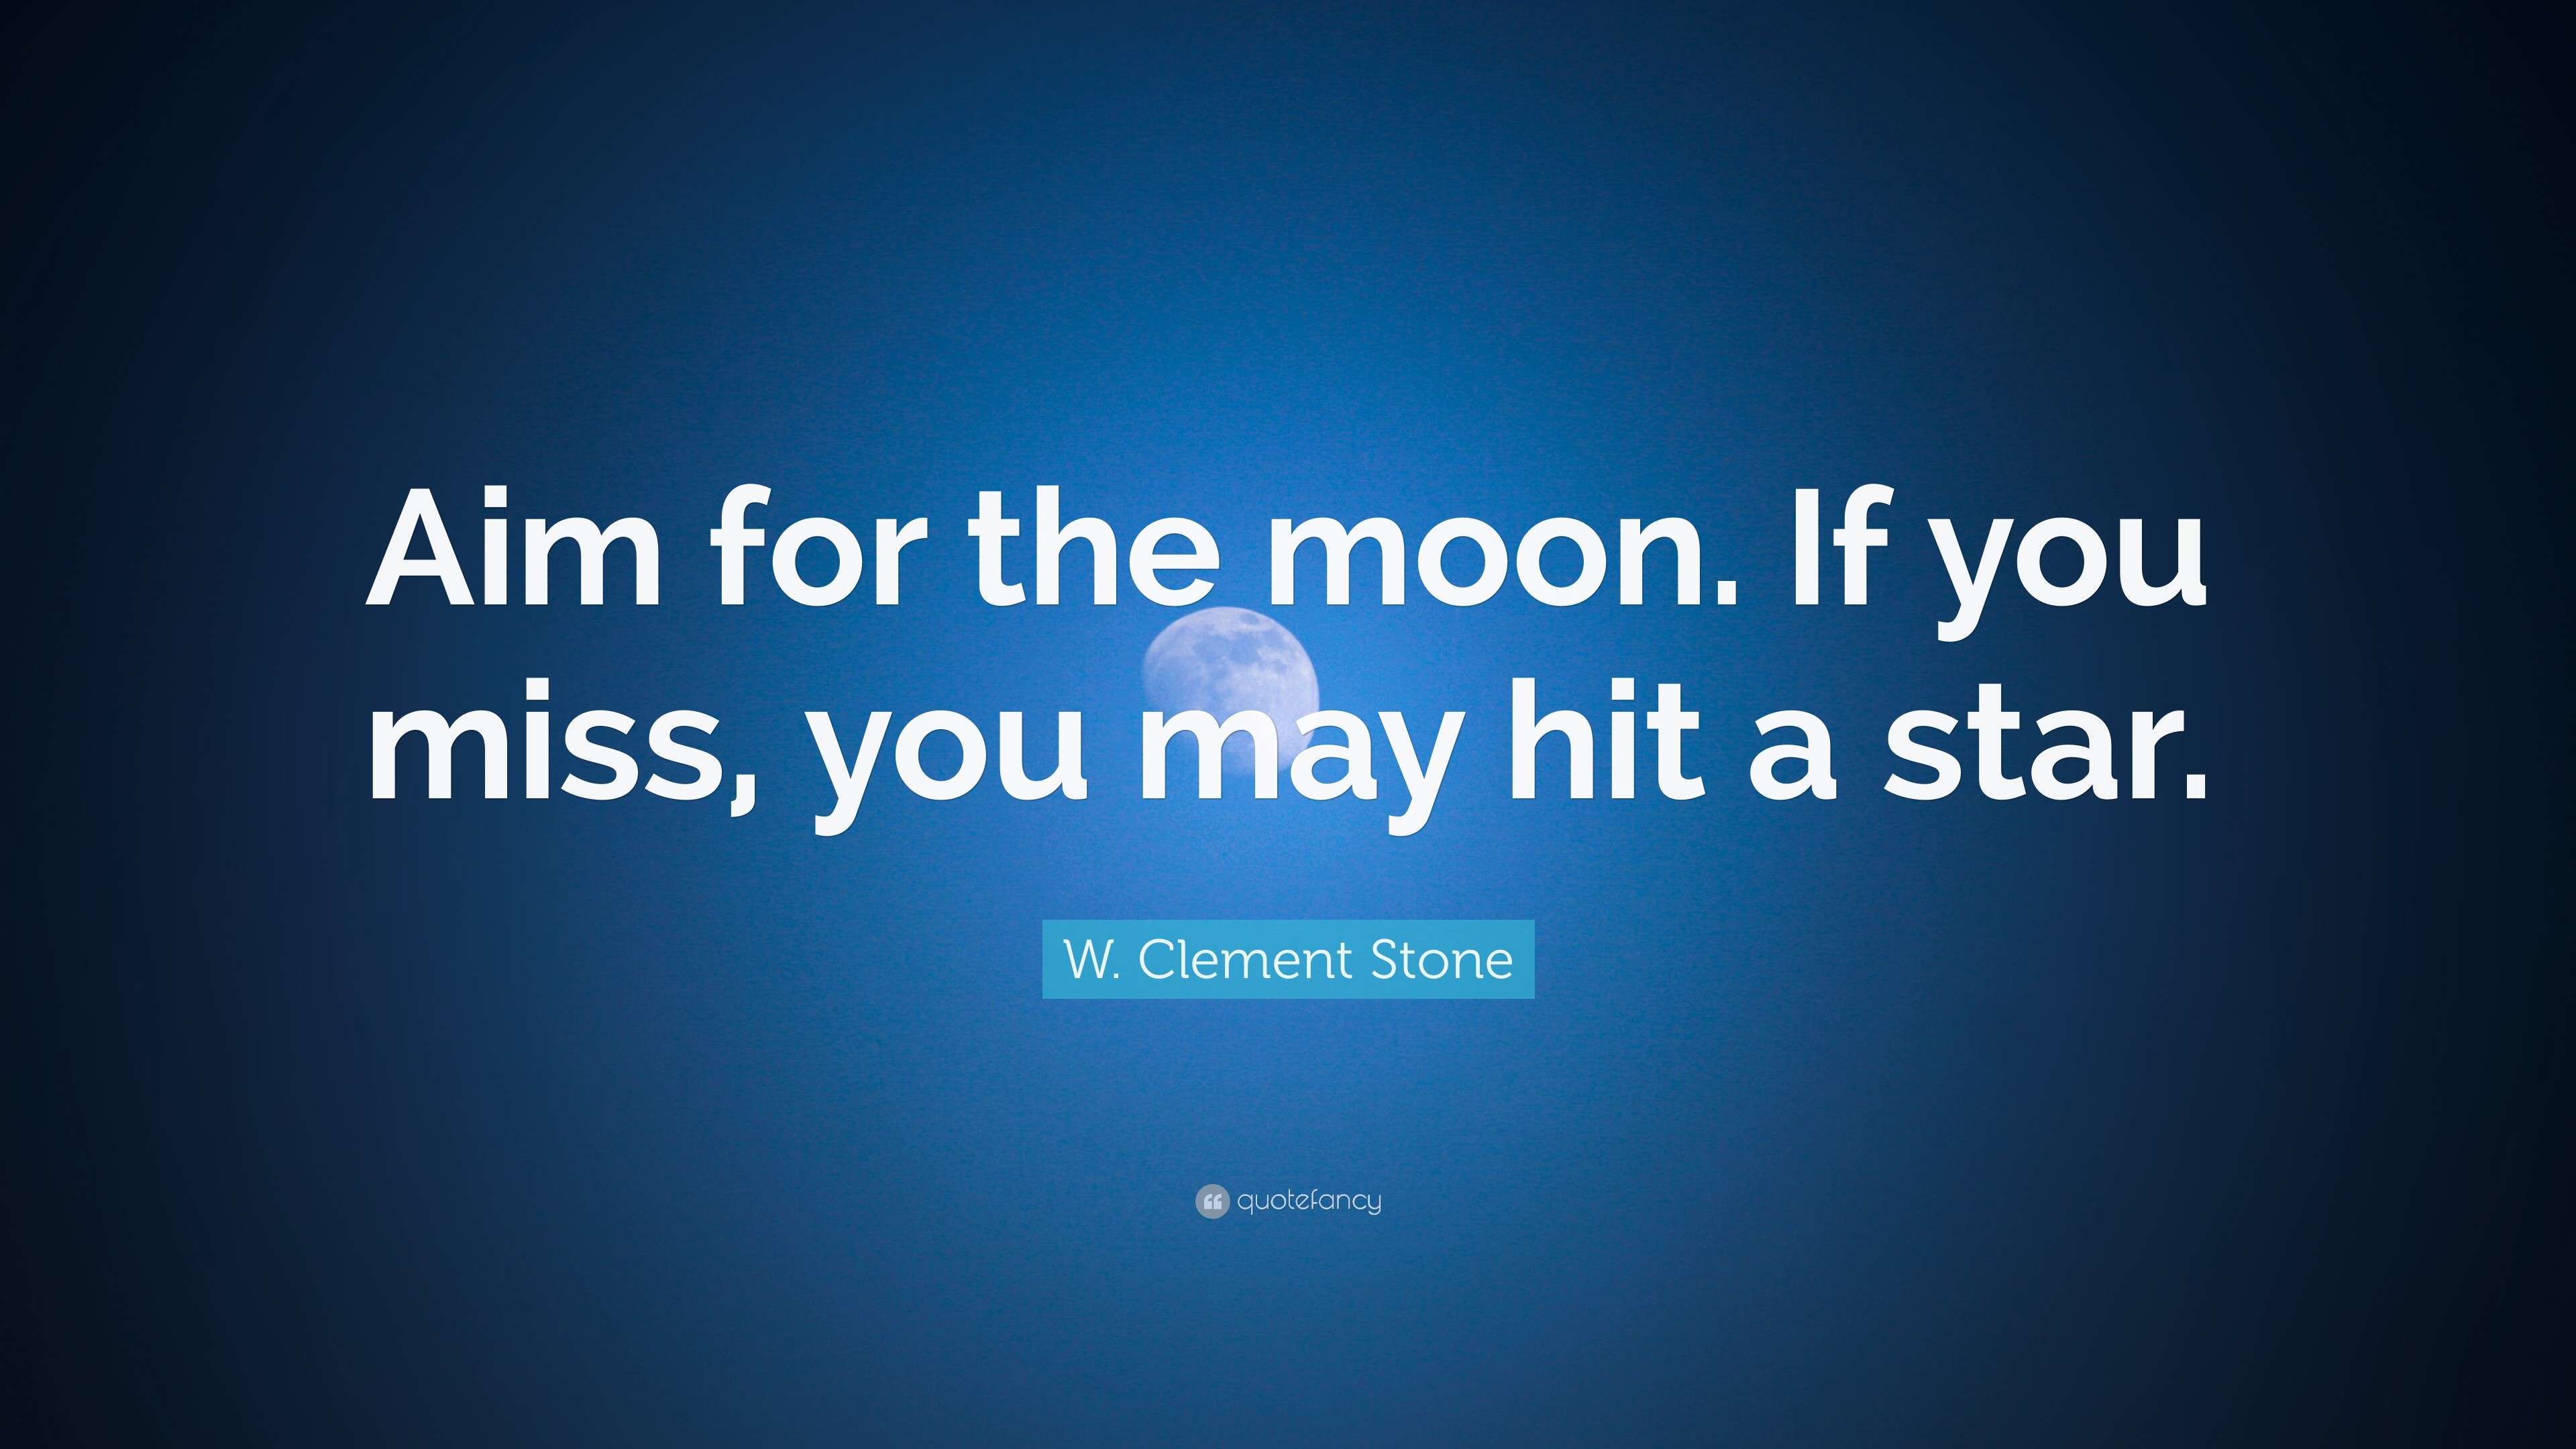 General 3840x2160 quote blue background typography quotefancy Moon motivational blue simple background digital art text